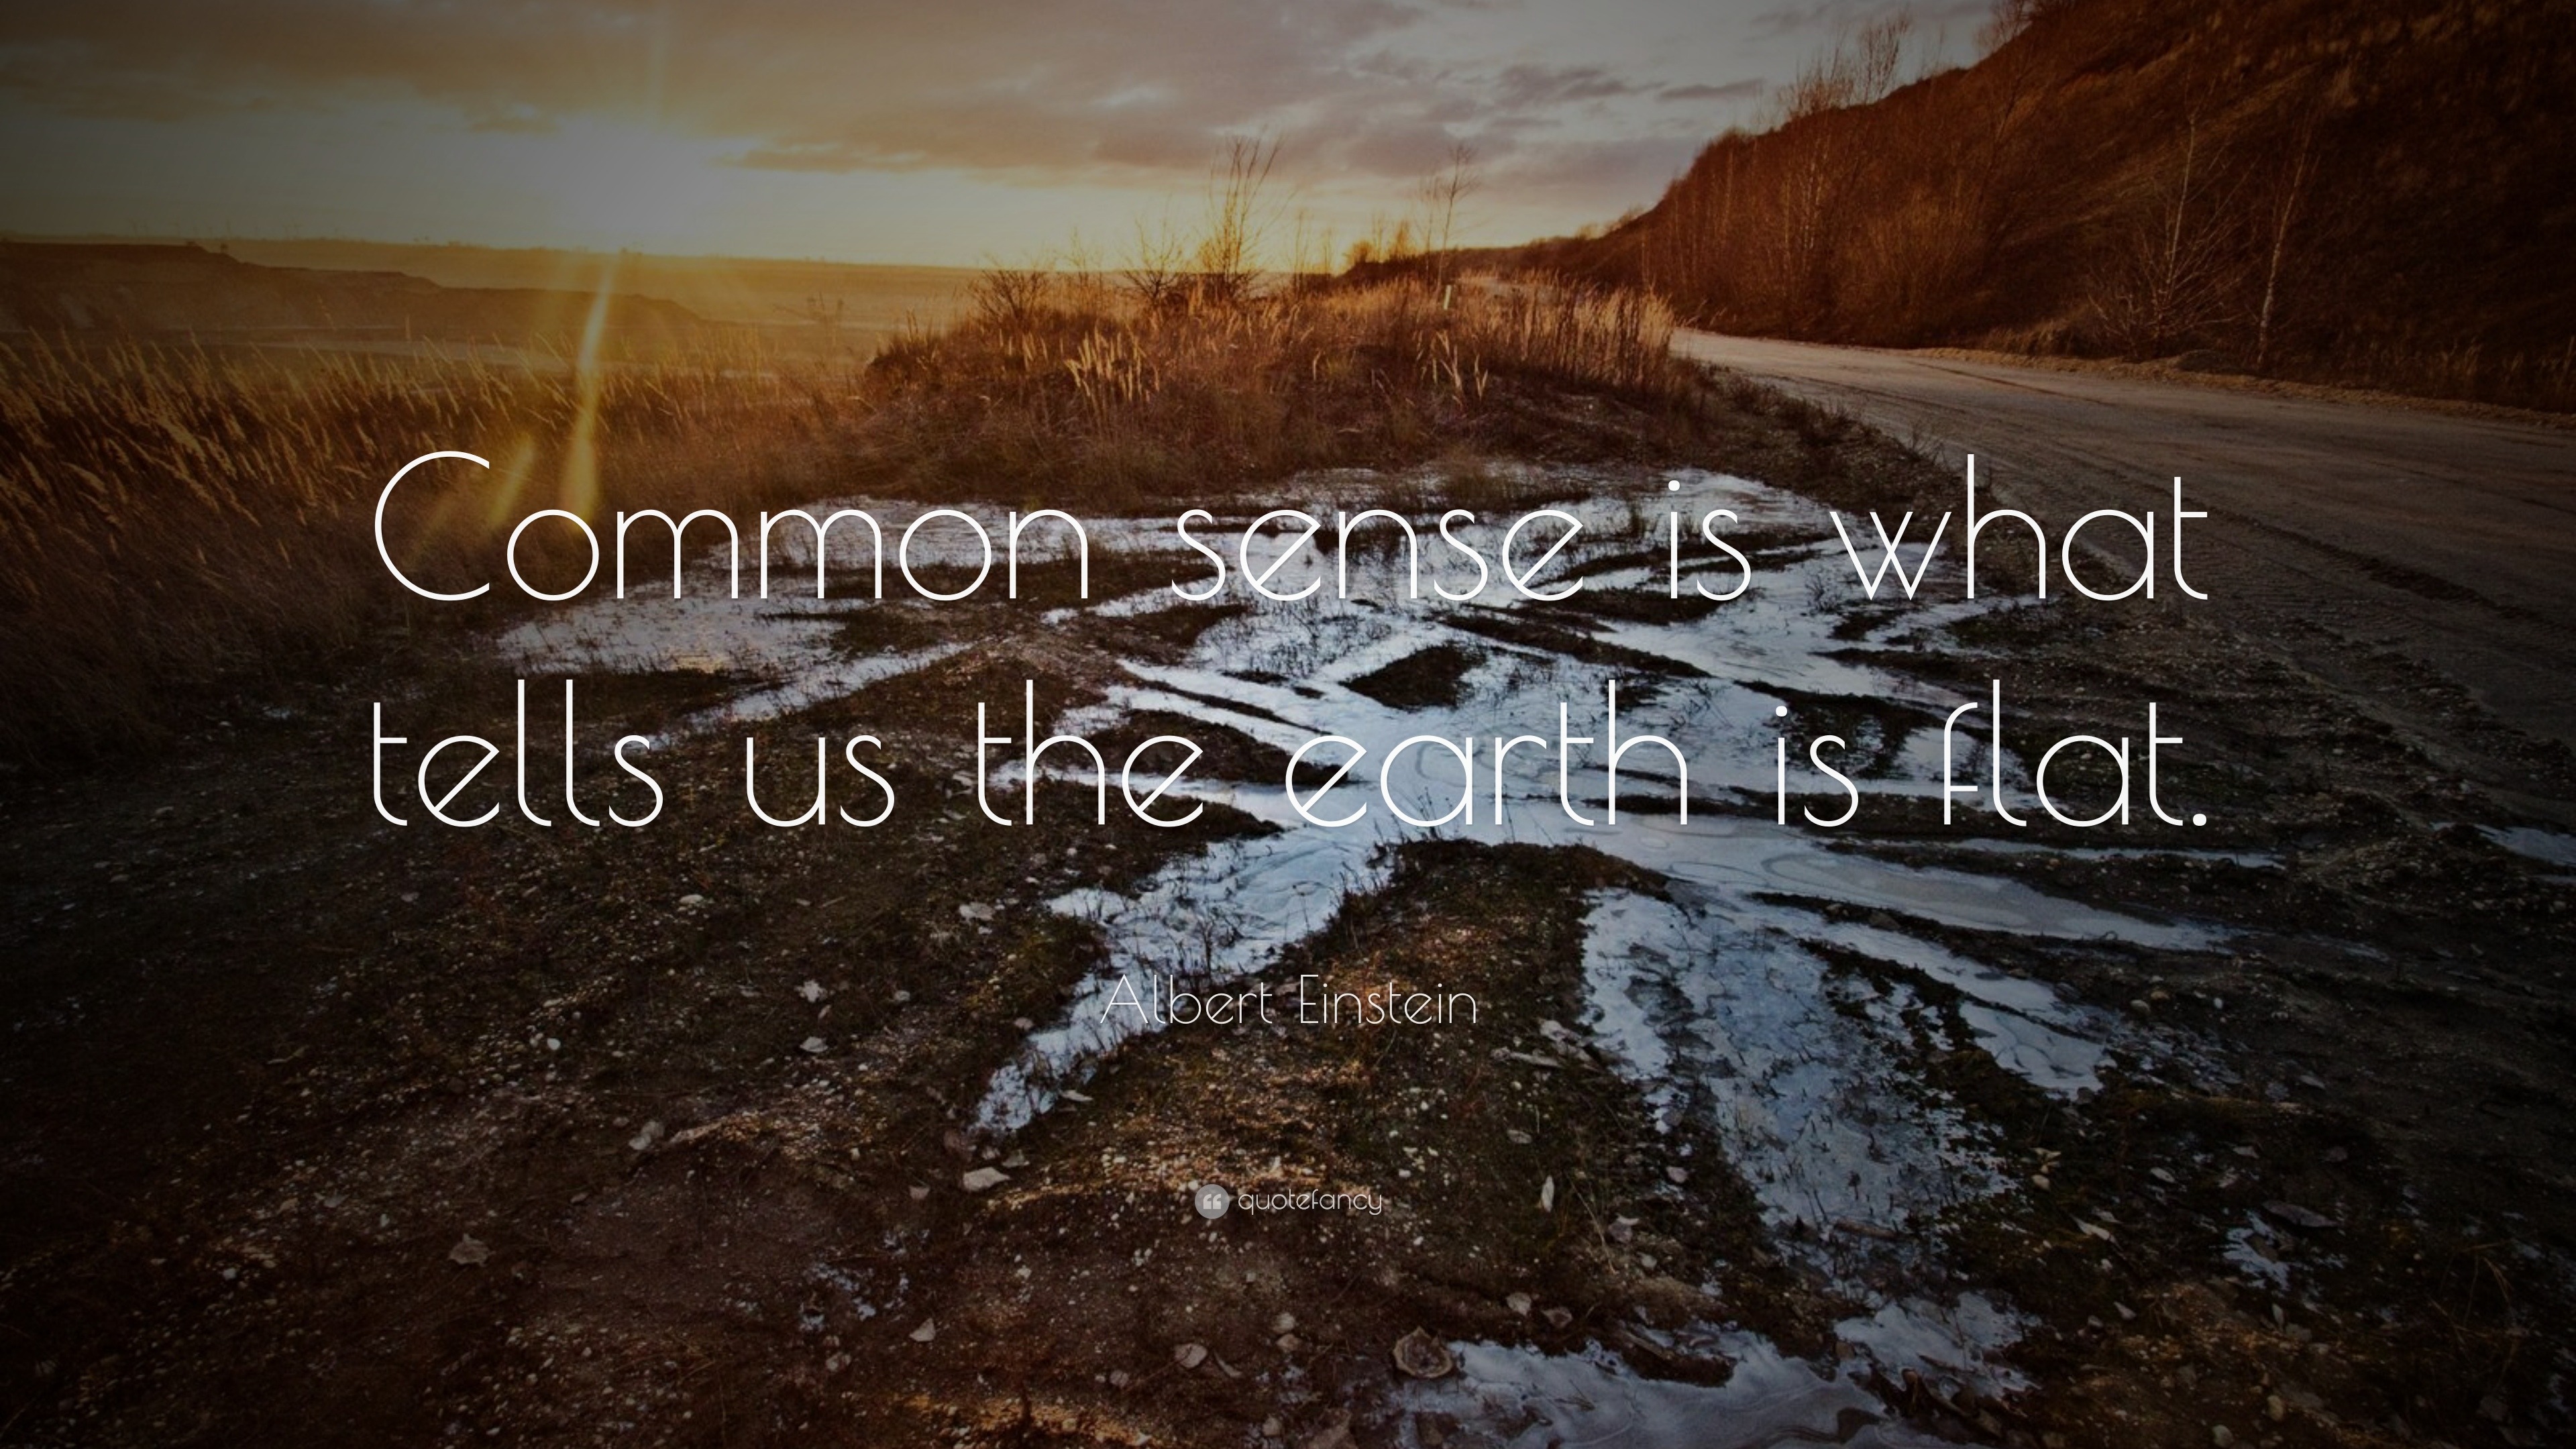 Albert Einstein Quote: “Common sense is what tells us the earth is flat ...